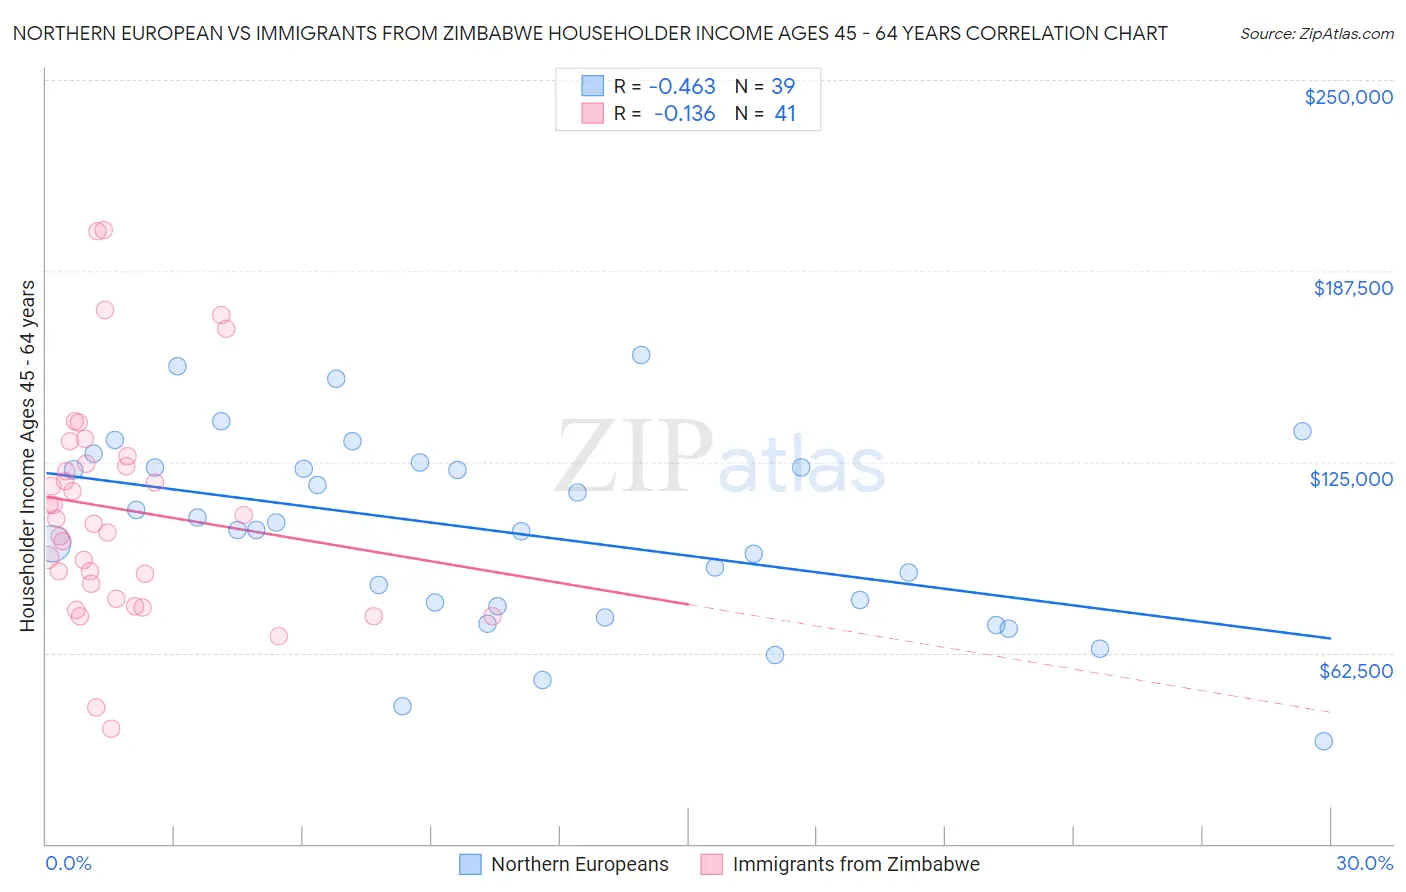 Northern European vs Immigrants from Zimbabwe Householder Income Ages 45 - 64 years